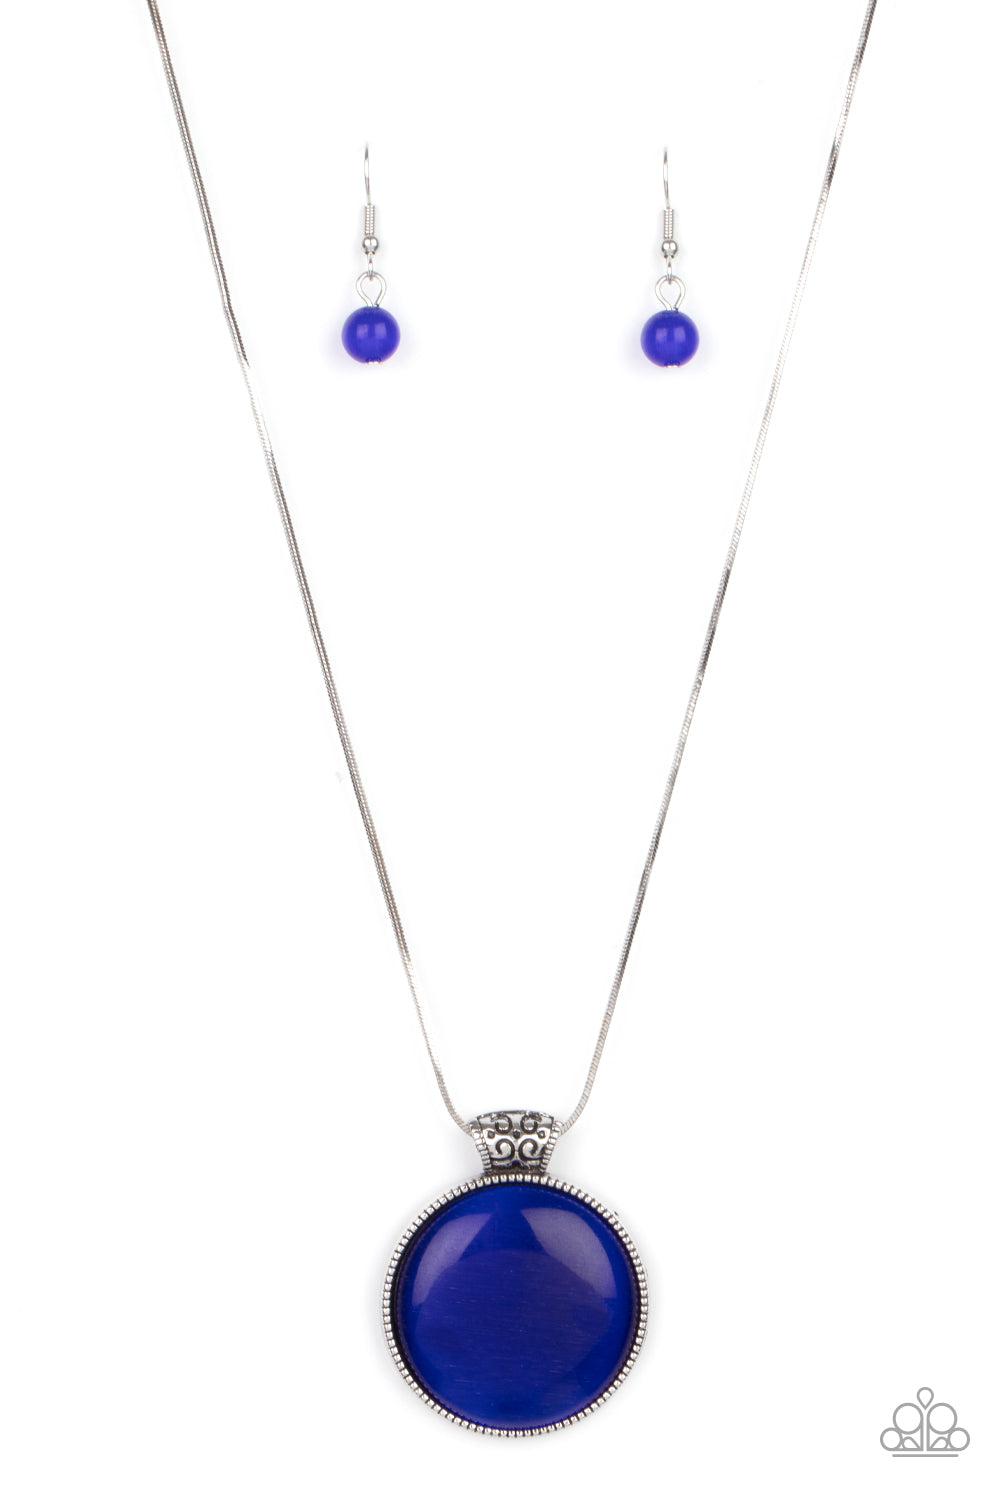 Attached to a decorative silver fitting, a dramatically oversized blue cat's eye stone pendant glides along a rounded silver snake chain below the collar for a powerful pop of color. Features an adjustable clasp closure.  Sold as one individual necklace by Paparazzi  Includes one pair of matching earrings.